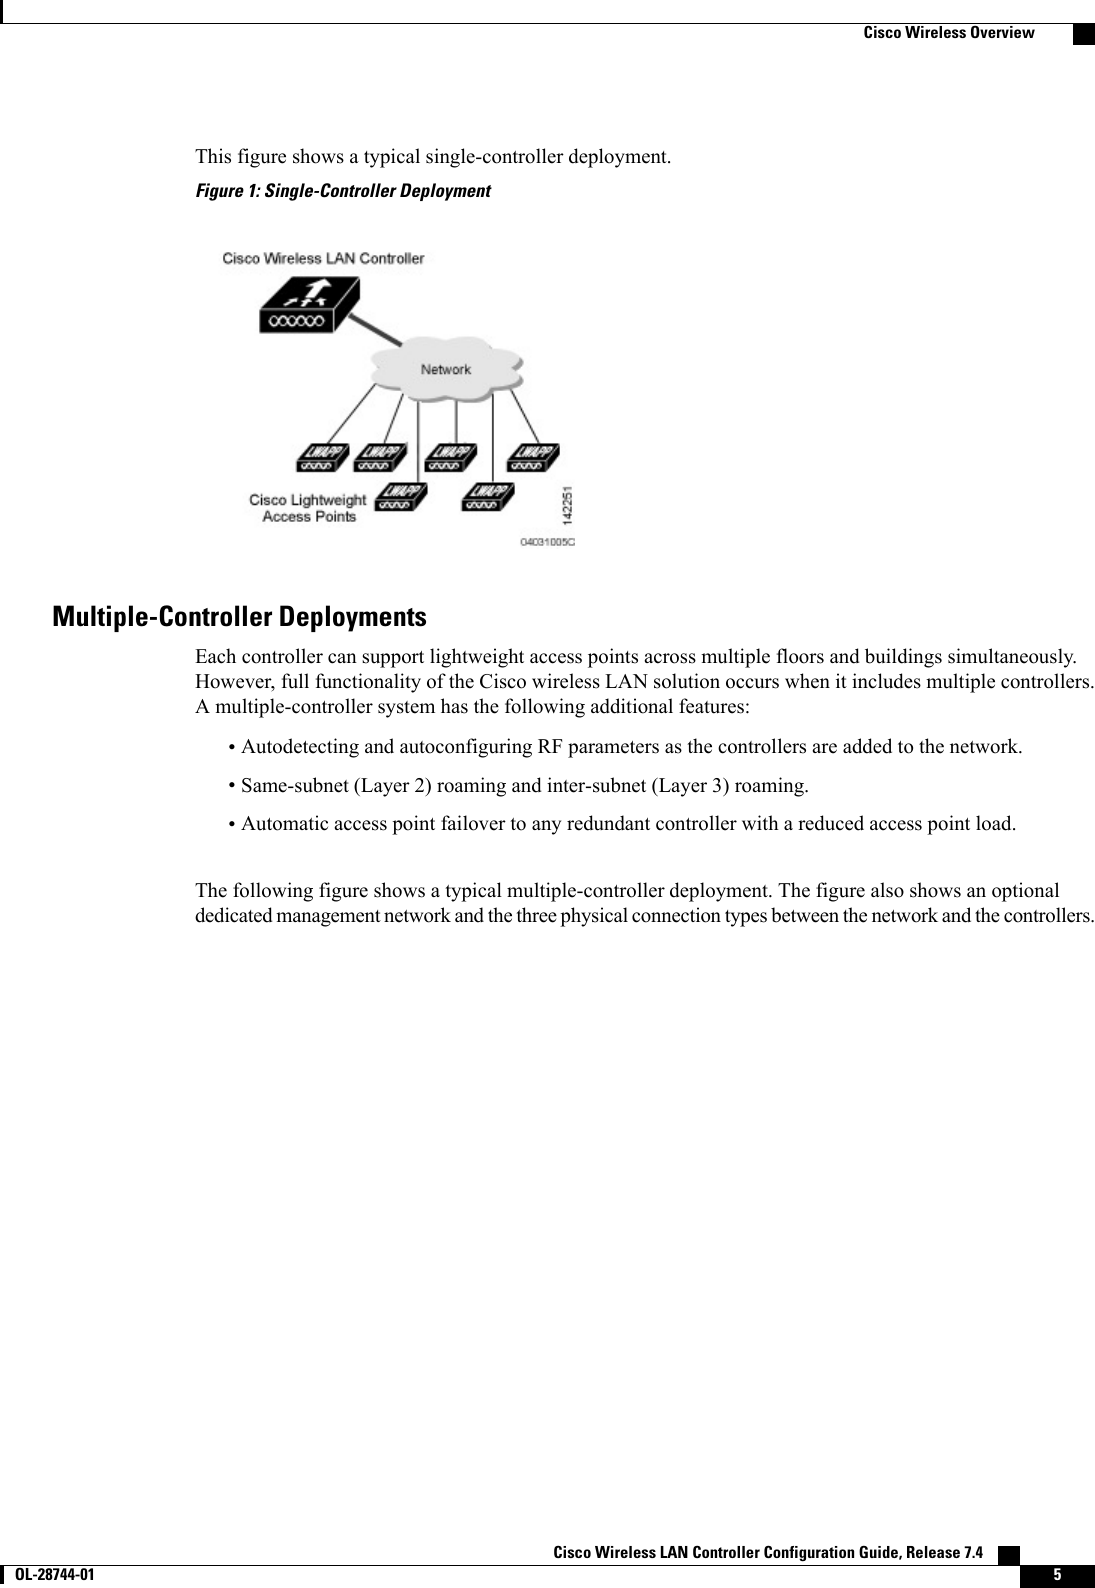 This figure shows a typical single-controller deployment.Figure 1: Single-Controller DeploymentMultiple-Controller DeploymentsEach controller can support lightweight access points across multiple floors and buildings simultaneously.However, full functionality of the Cisco wireless LAN solution occurs when it includes multiple controllers.A multiple-controller system has the following additional features:•Autodetecting and autoconfiguring RF parameters as the controllers are added to the network.•Same-subnet (Layer 2) roaming and inter-subnet (Layer 3) roaming.•Automatic access point failover to any redundant controller with a reduced access point load.The following figure shows a typical multiple-controller deployment. The figure also shows an optionaldedicated management network and the three physical connection types between the network and the controllers.Cisco Wireless LAN Controller Configuration Guide, Release 7.4       OL-28744-01 5Cisco Wireless Overview